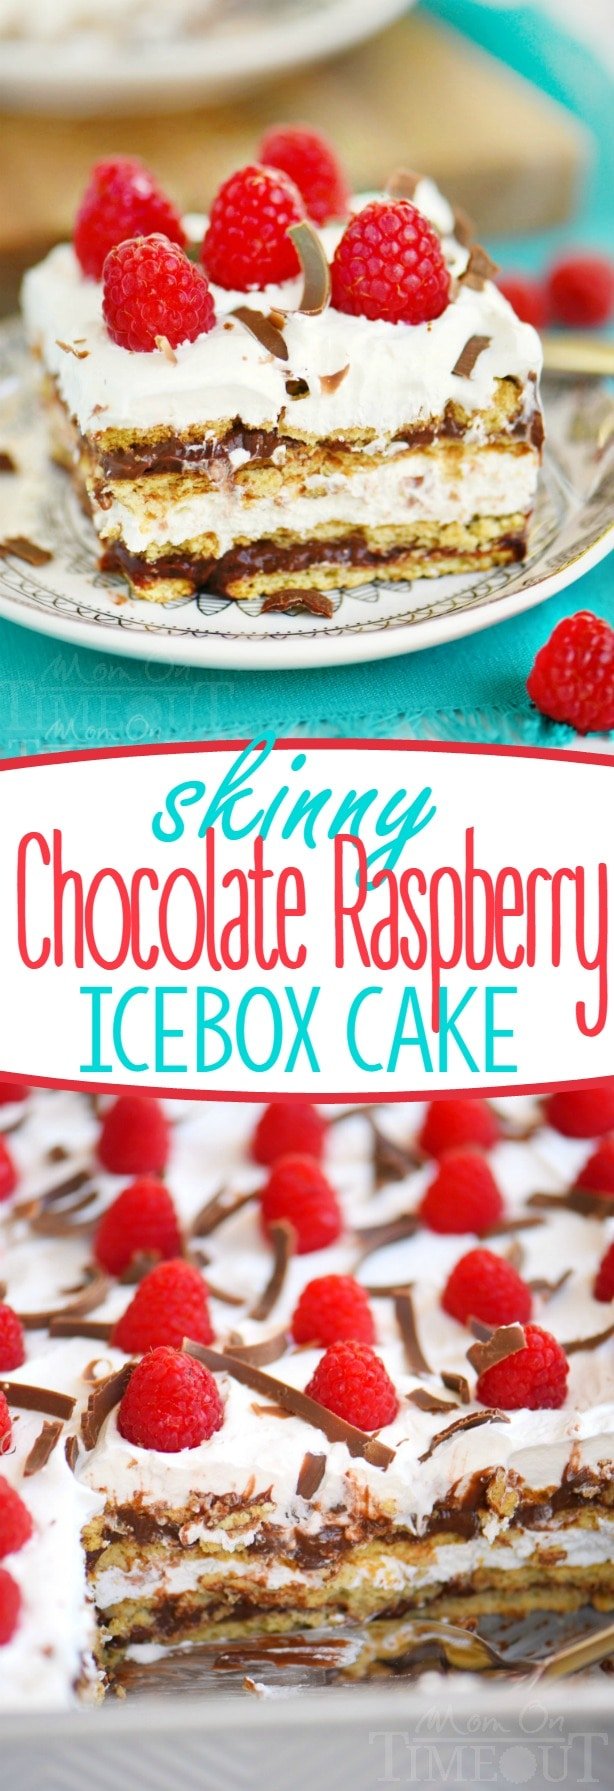 Because summer is too short to not eat cake...Keep the oven off and enjoy this Skinny Chocolate Raspberry Icebox Cake today! This easy dessert recipe is perfect for hot summer days AND swimsuit season! Comes together in no time and trust me, it will be the star of the show!